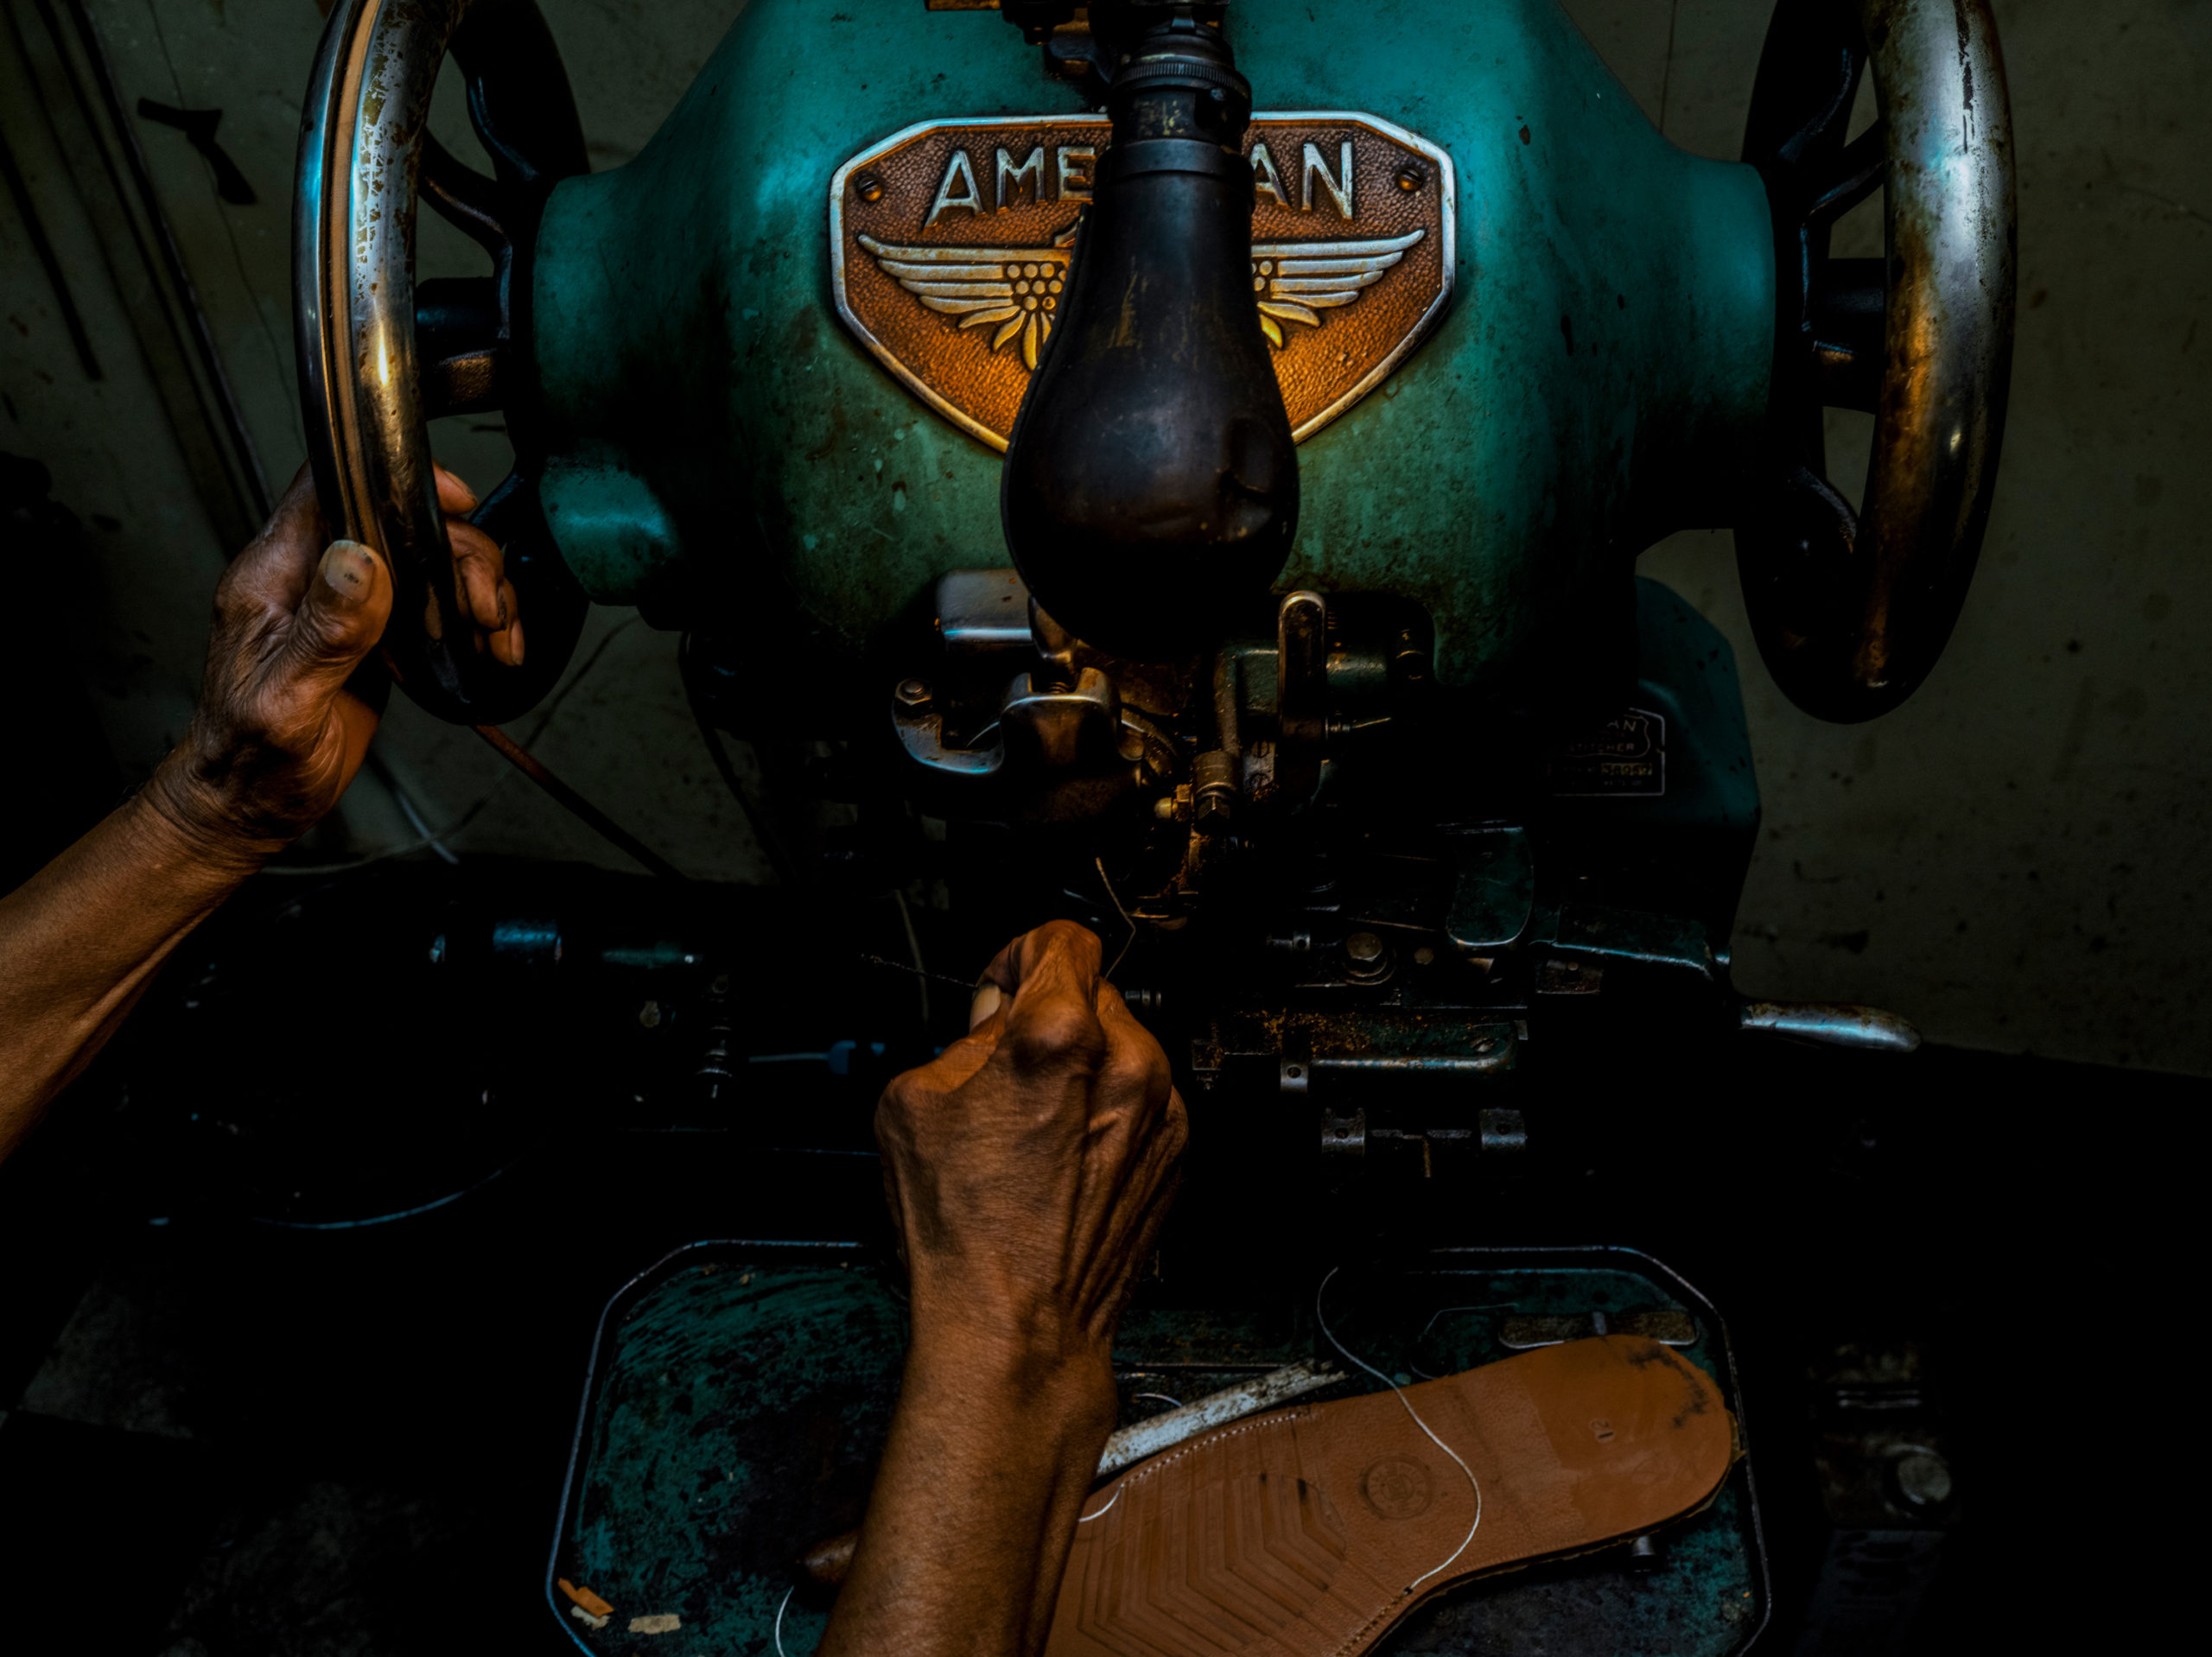 A shoemaker changes the sole of a shoe.